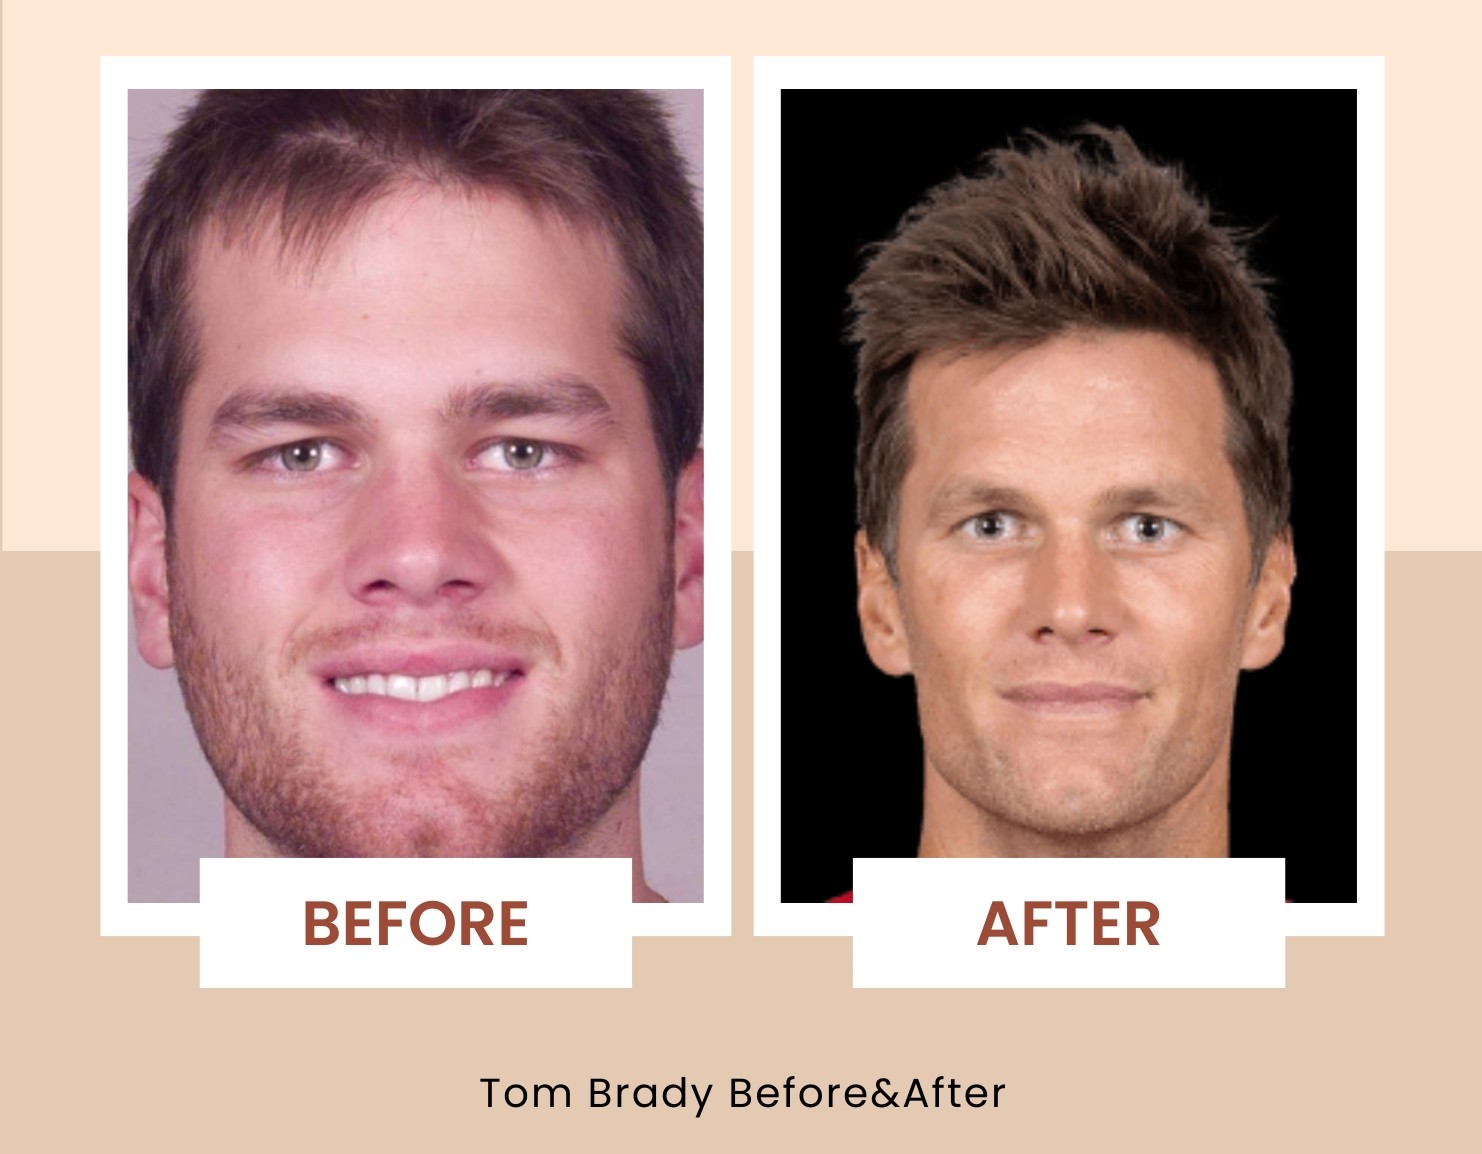 Tom Brady before after